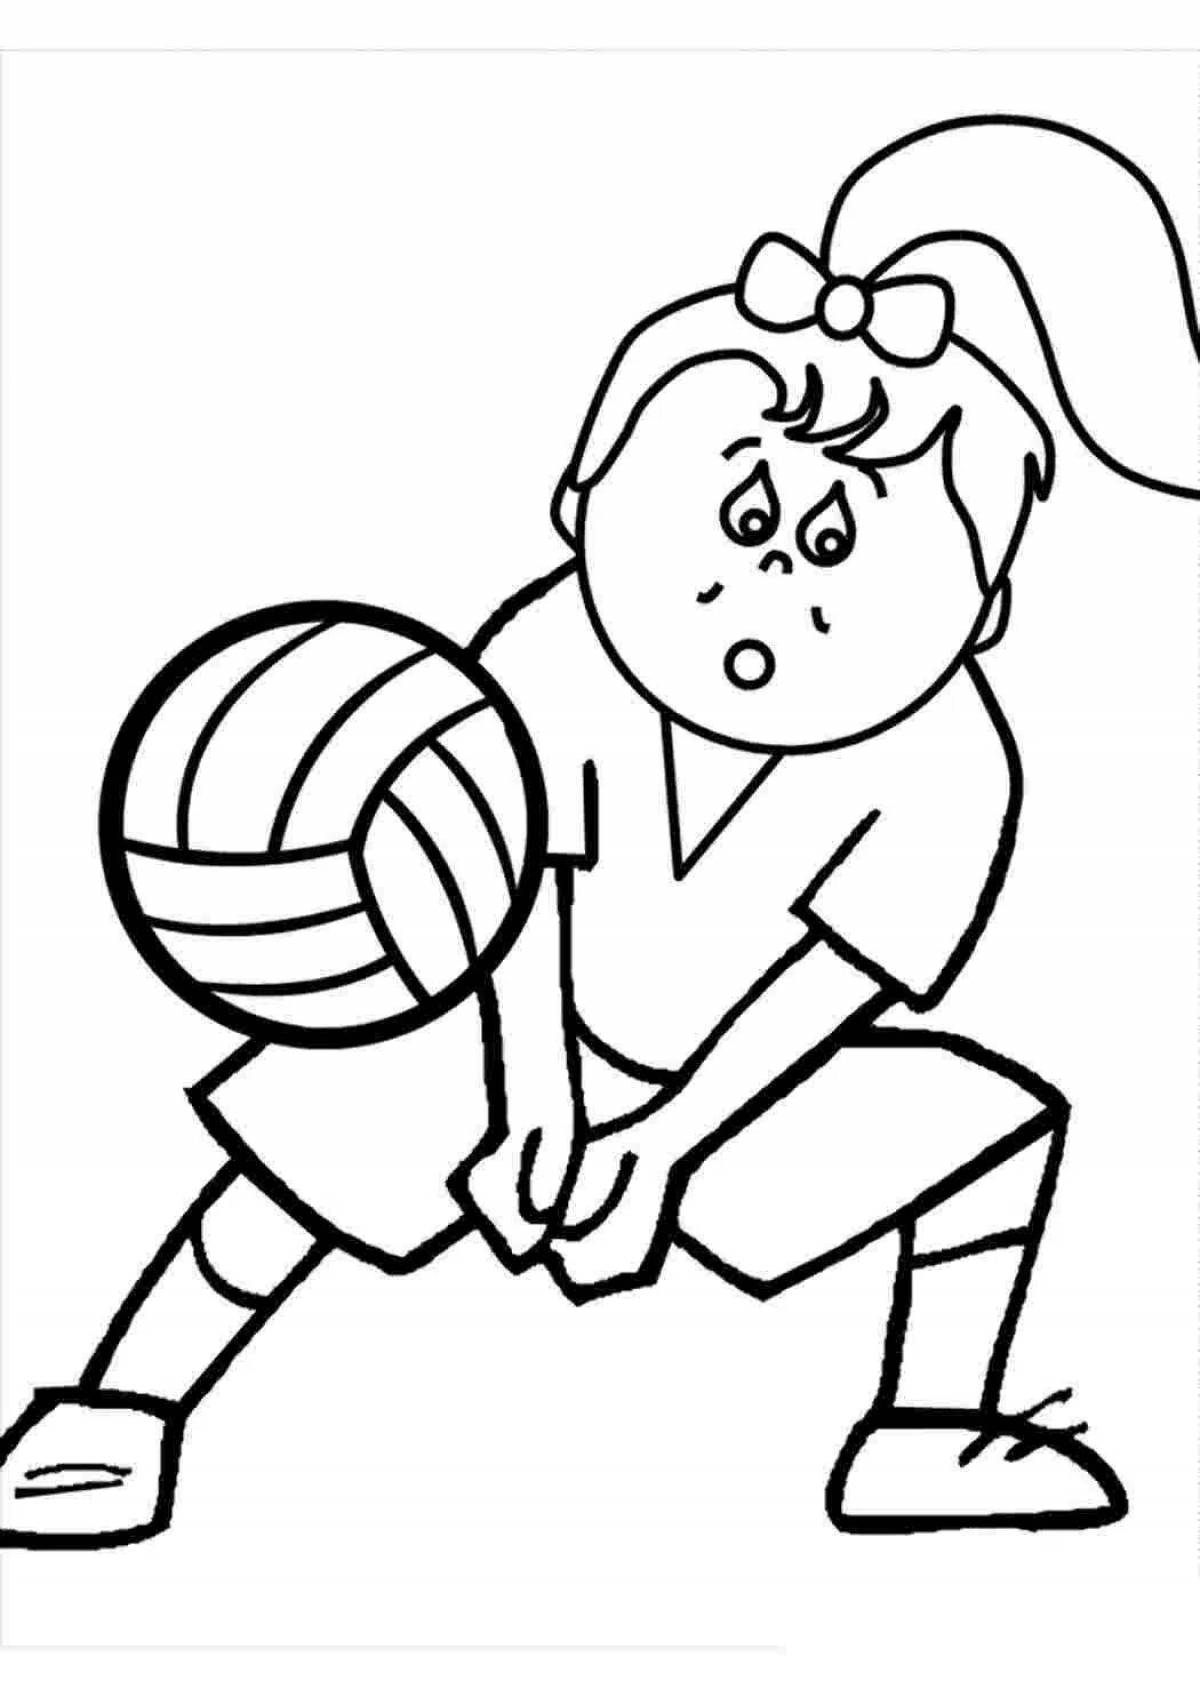 Colorful sports games coloring book